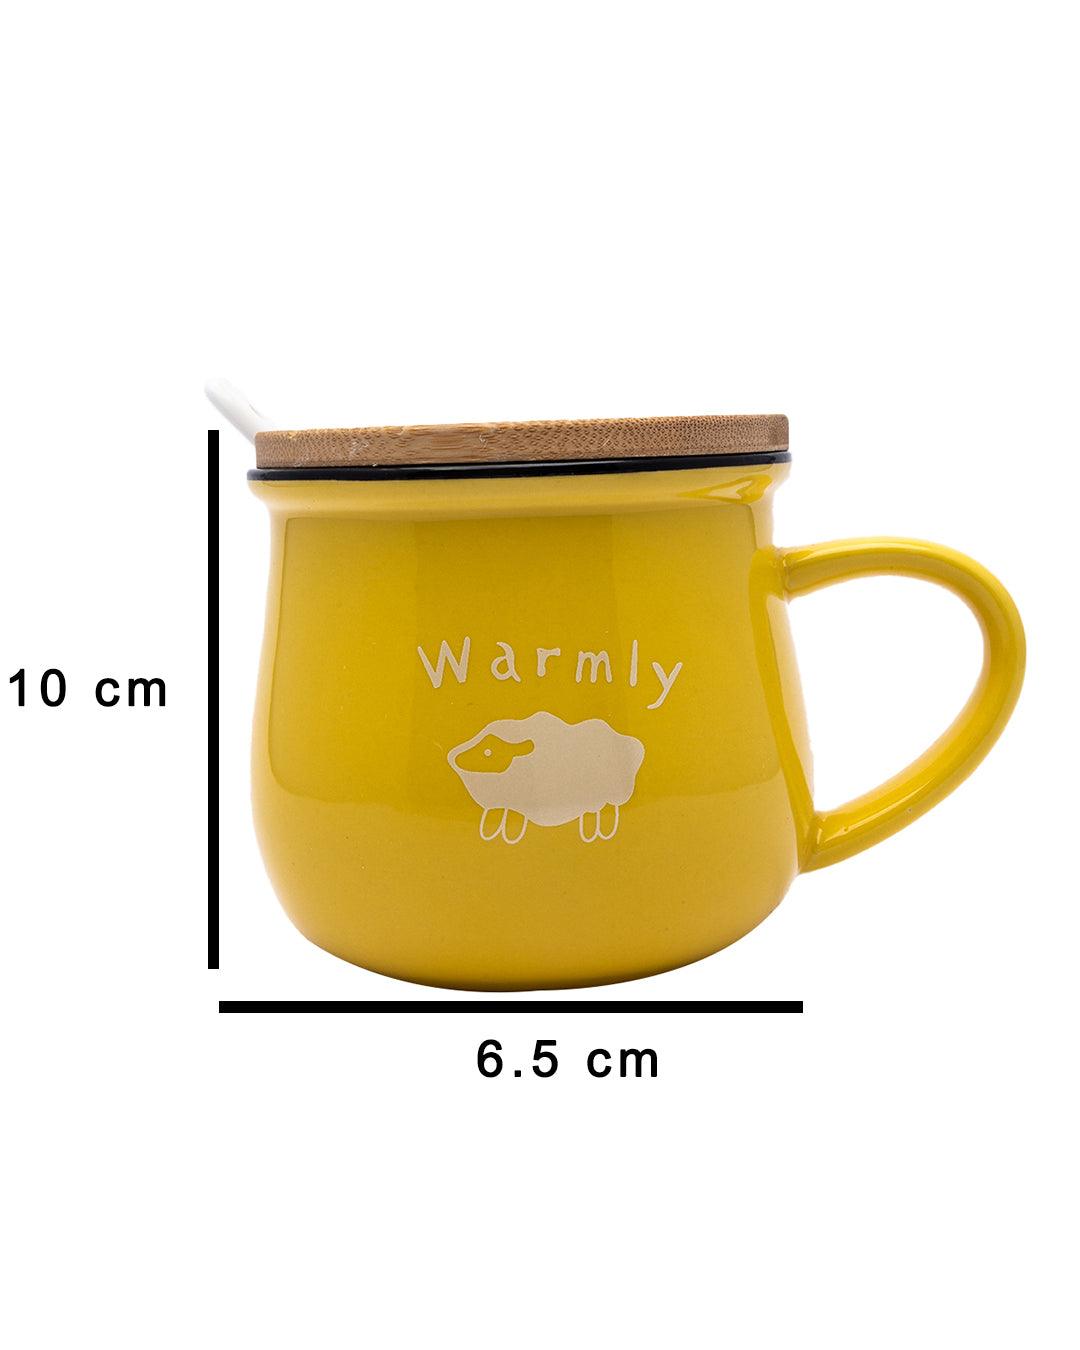 Warmly - Coffe Cup with Lid and Spoon